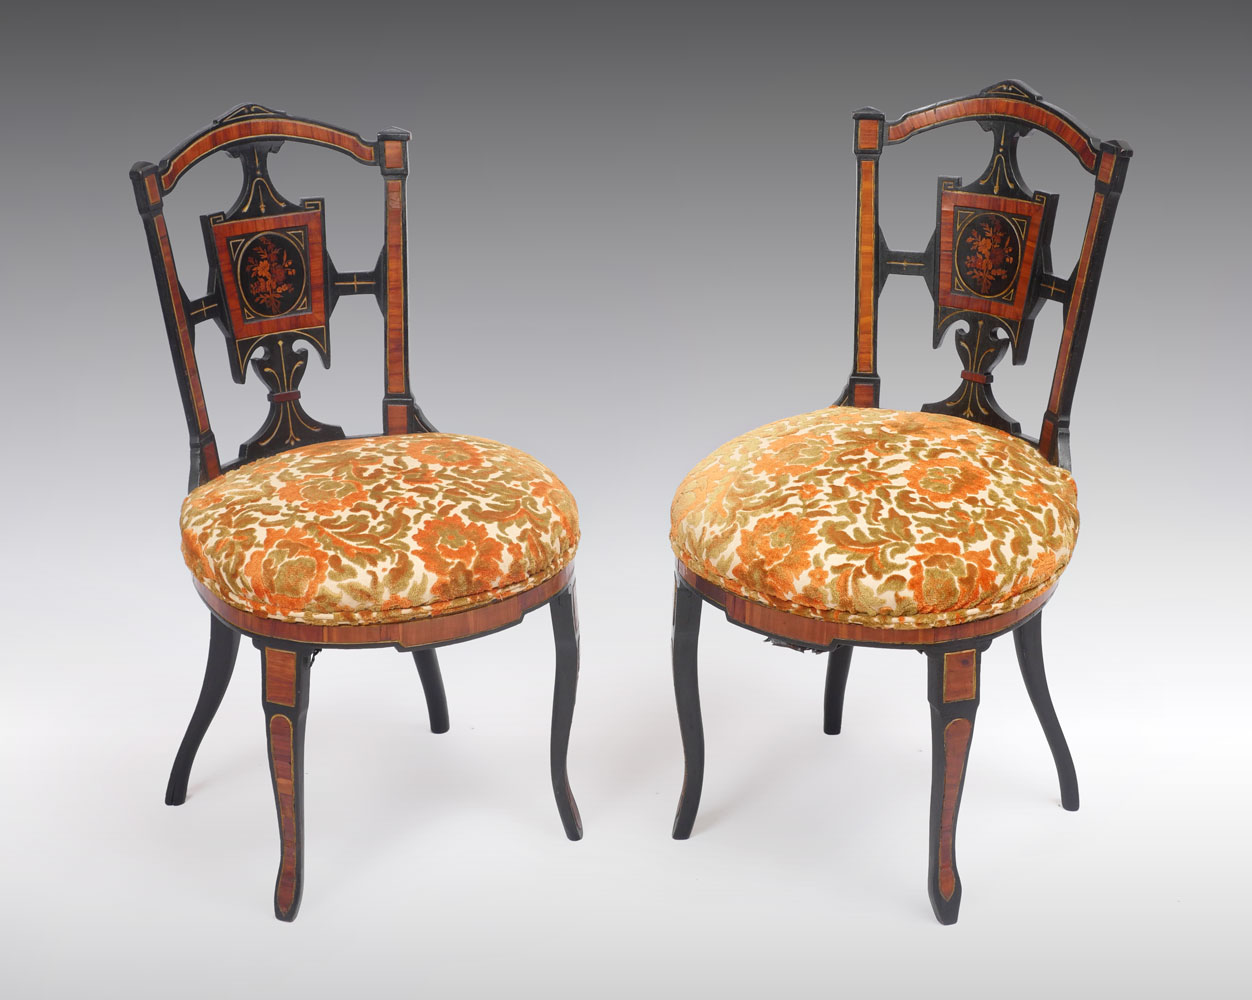 PAIR OF VICTORIAN INLAID CHAIRS  36e43a